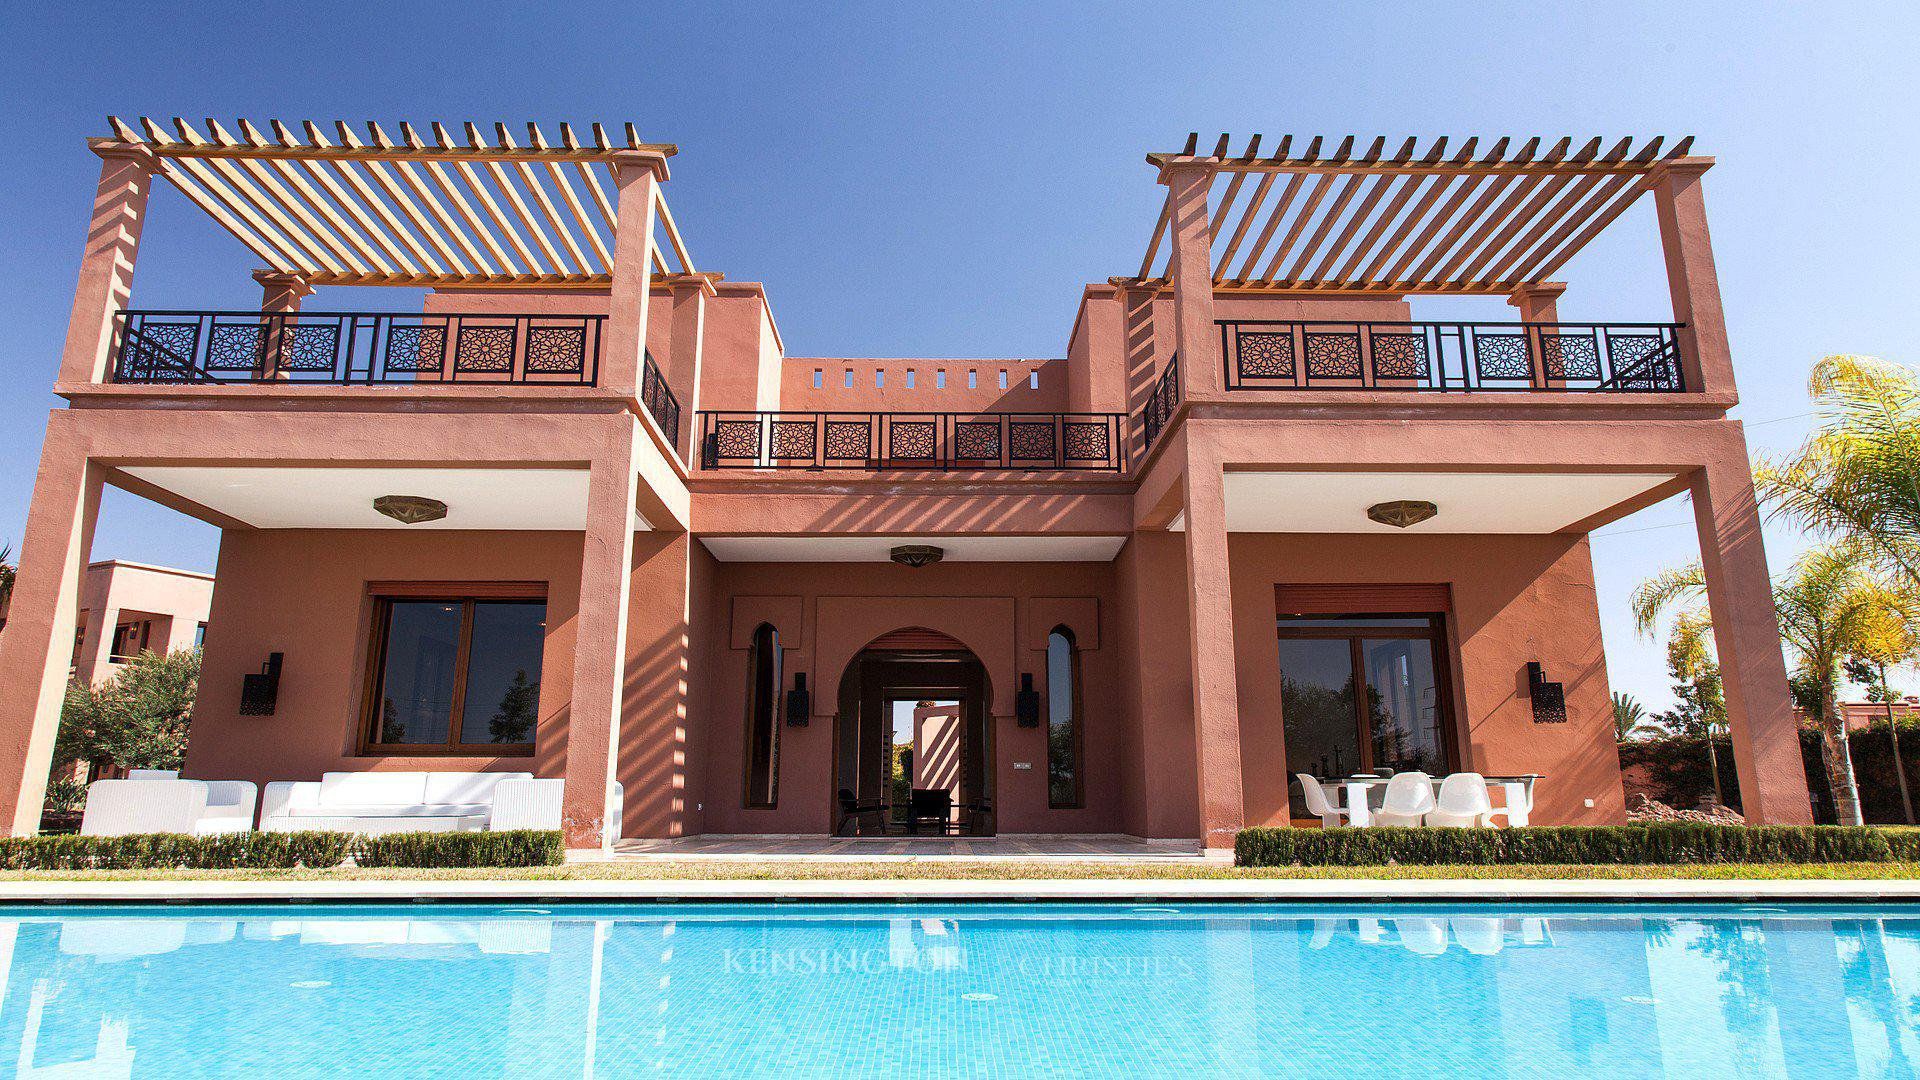 Morocco Mansions Wallpapers